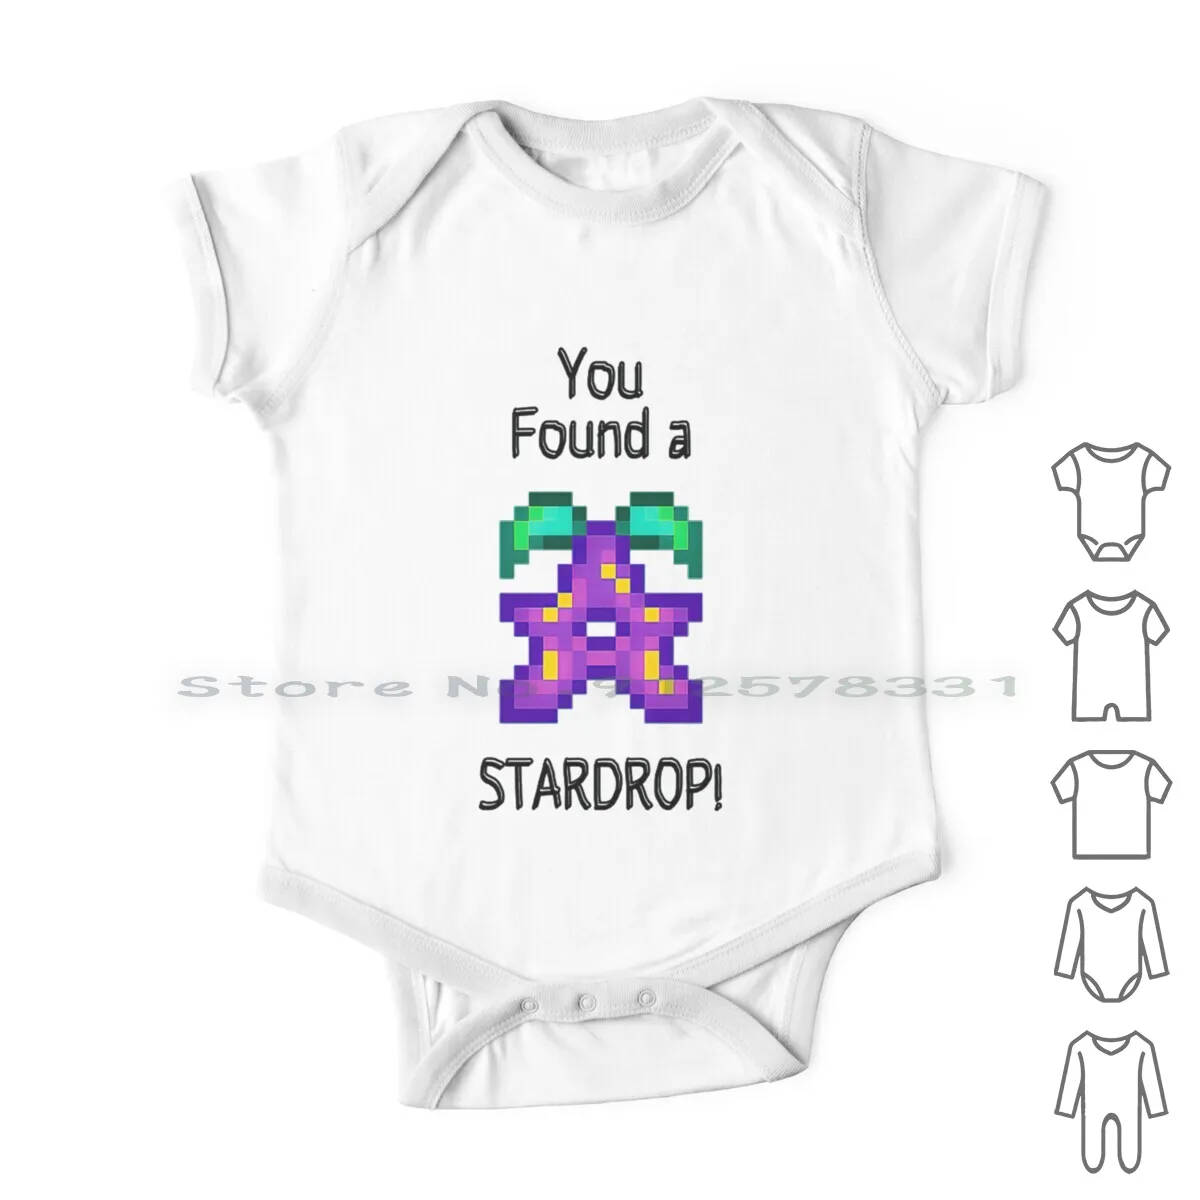 Stardew Valley Newborn Baby Clothes Rompers Cotton Jumpsuits Farming Gaming Video Games Junimo Stardewvalley Pixel Art Animals